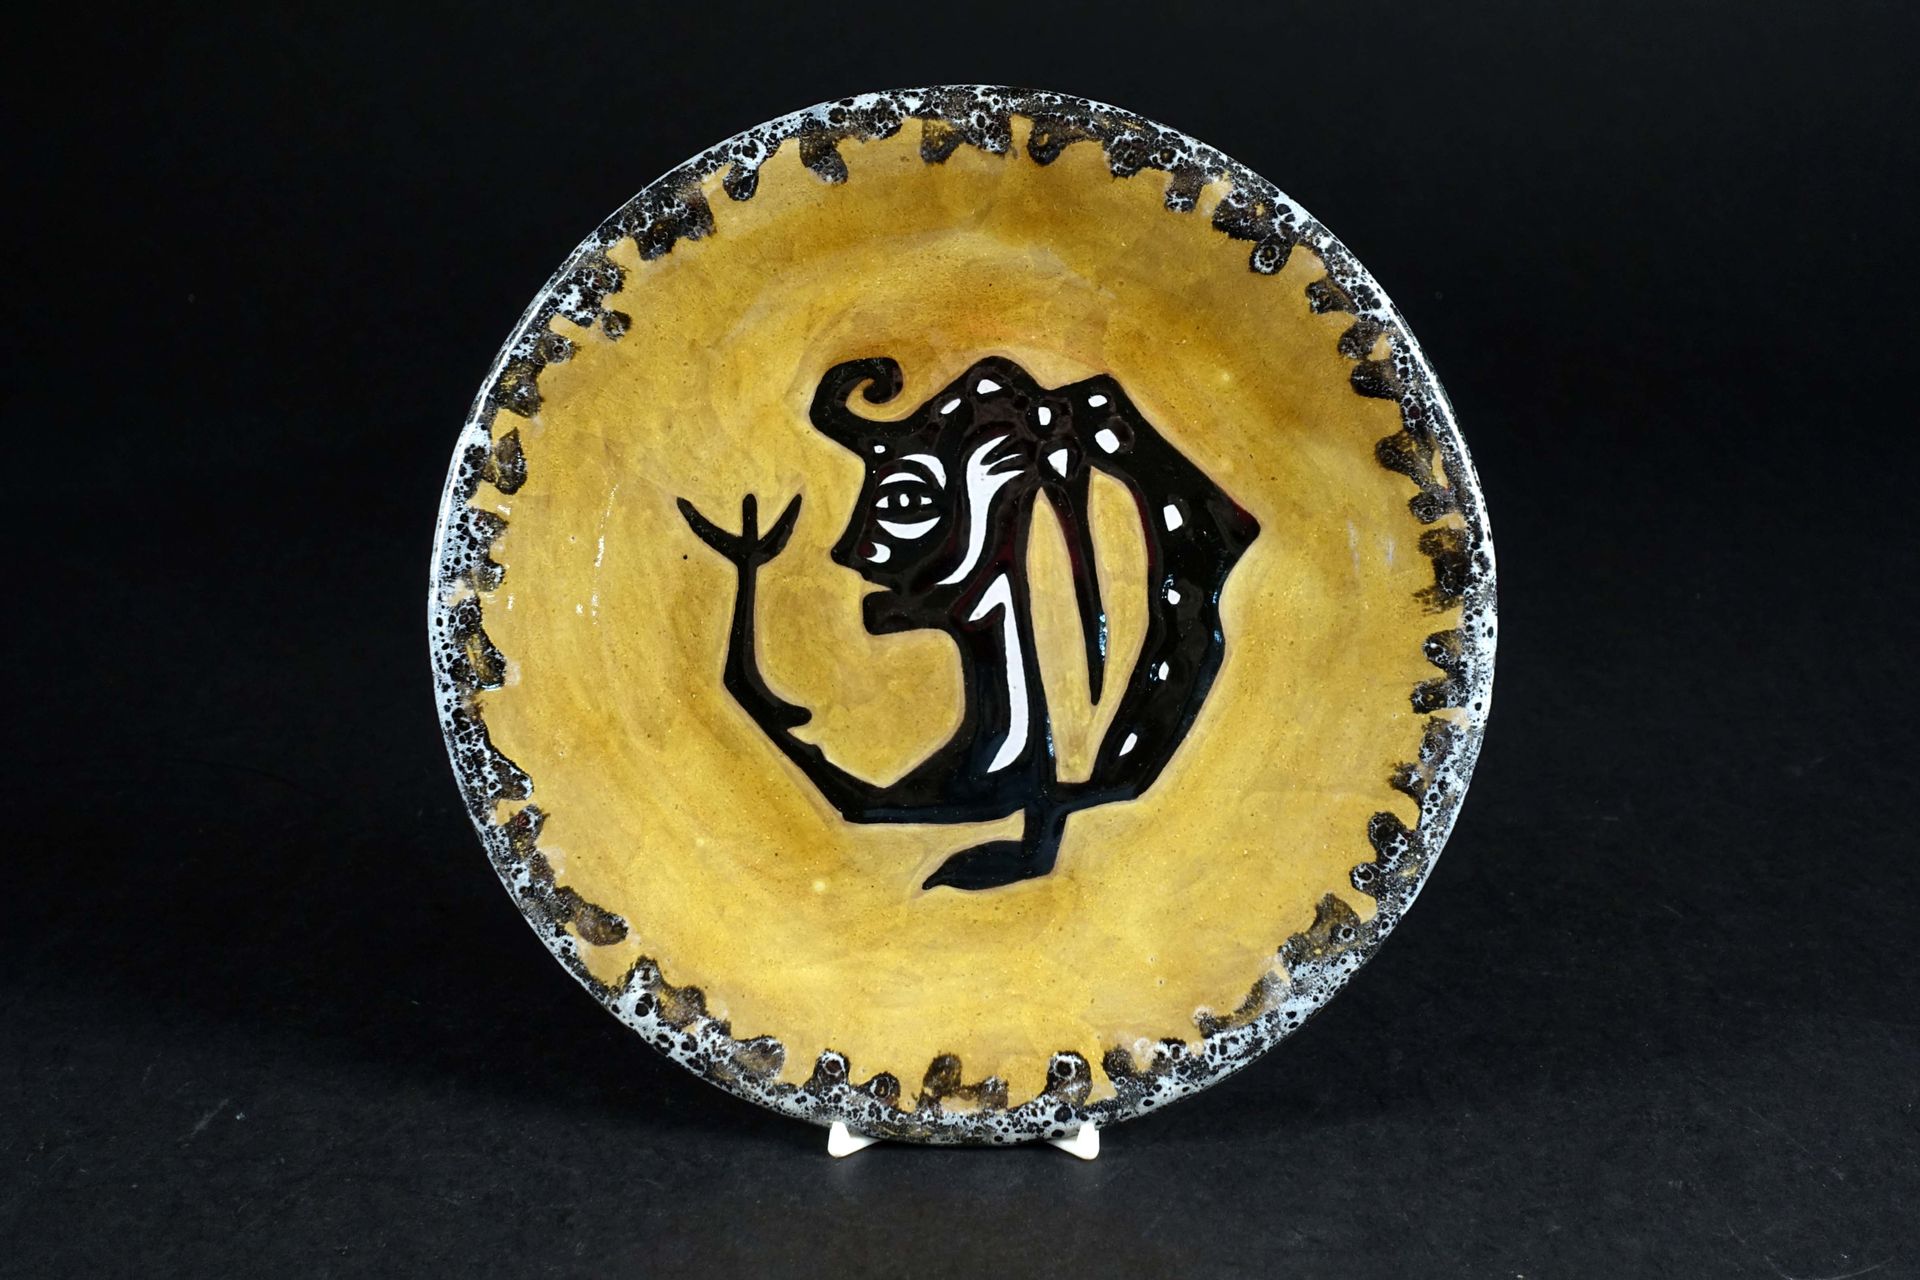 Jean LURCAT (1892-1966). Untitled. Round dish with a face in profile on a mustar&hellip;